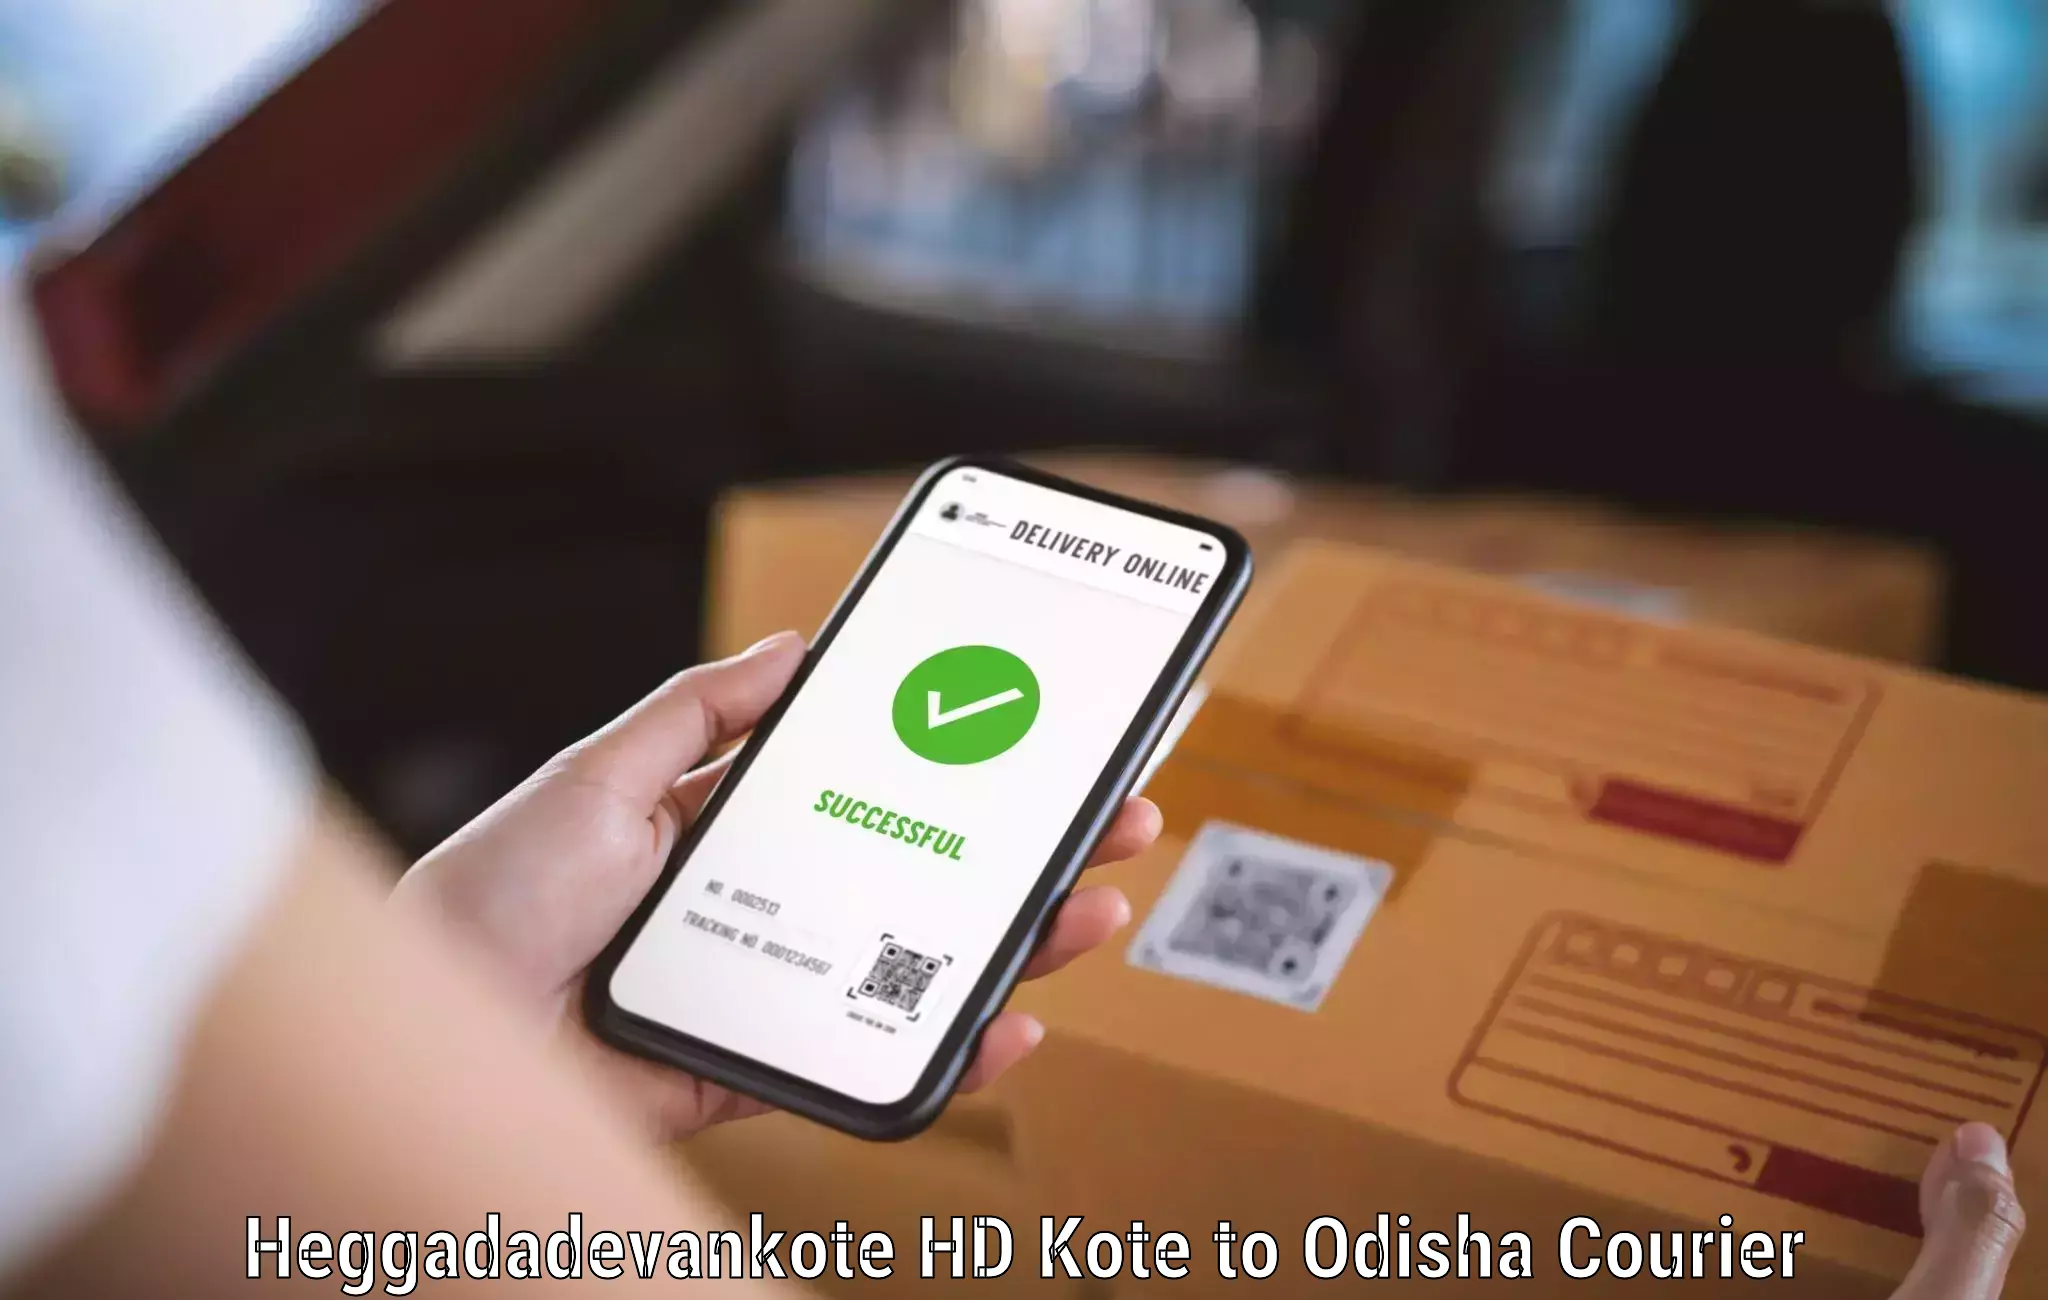 Postal and courier services in Heggadadevankote HD Kote to Kantamal